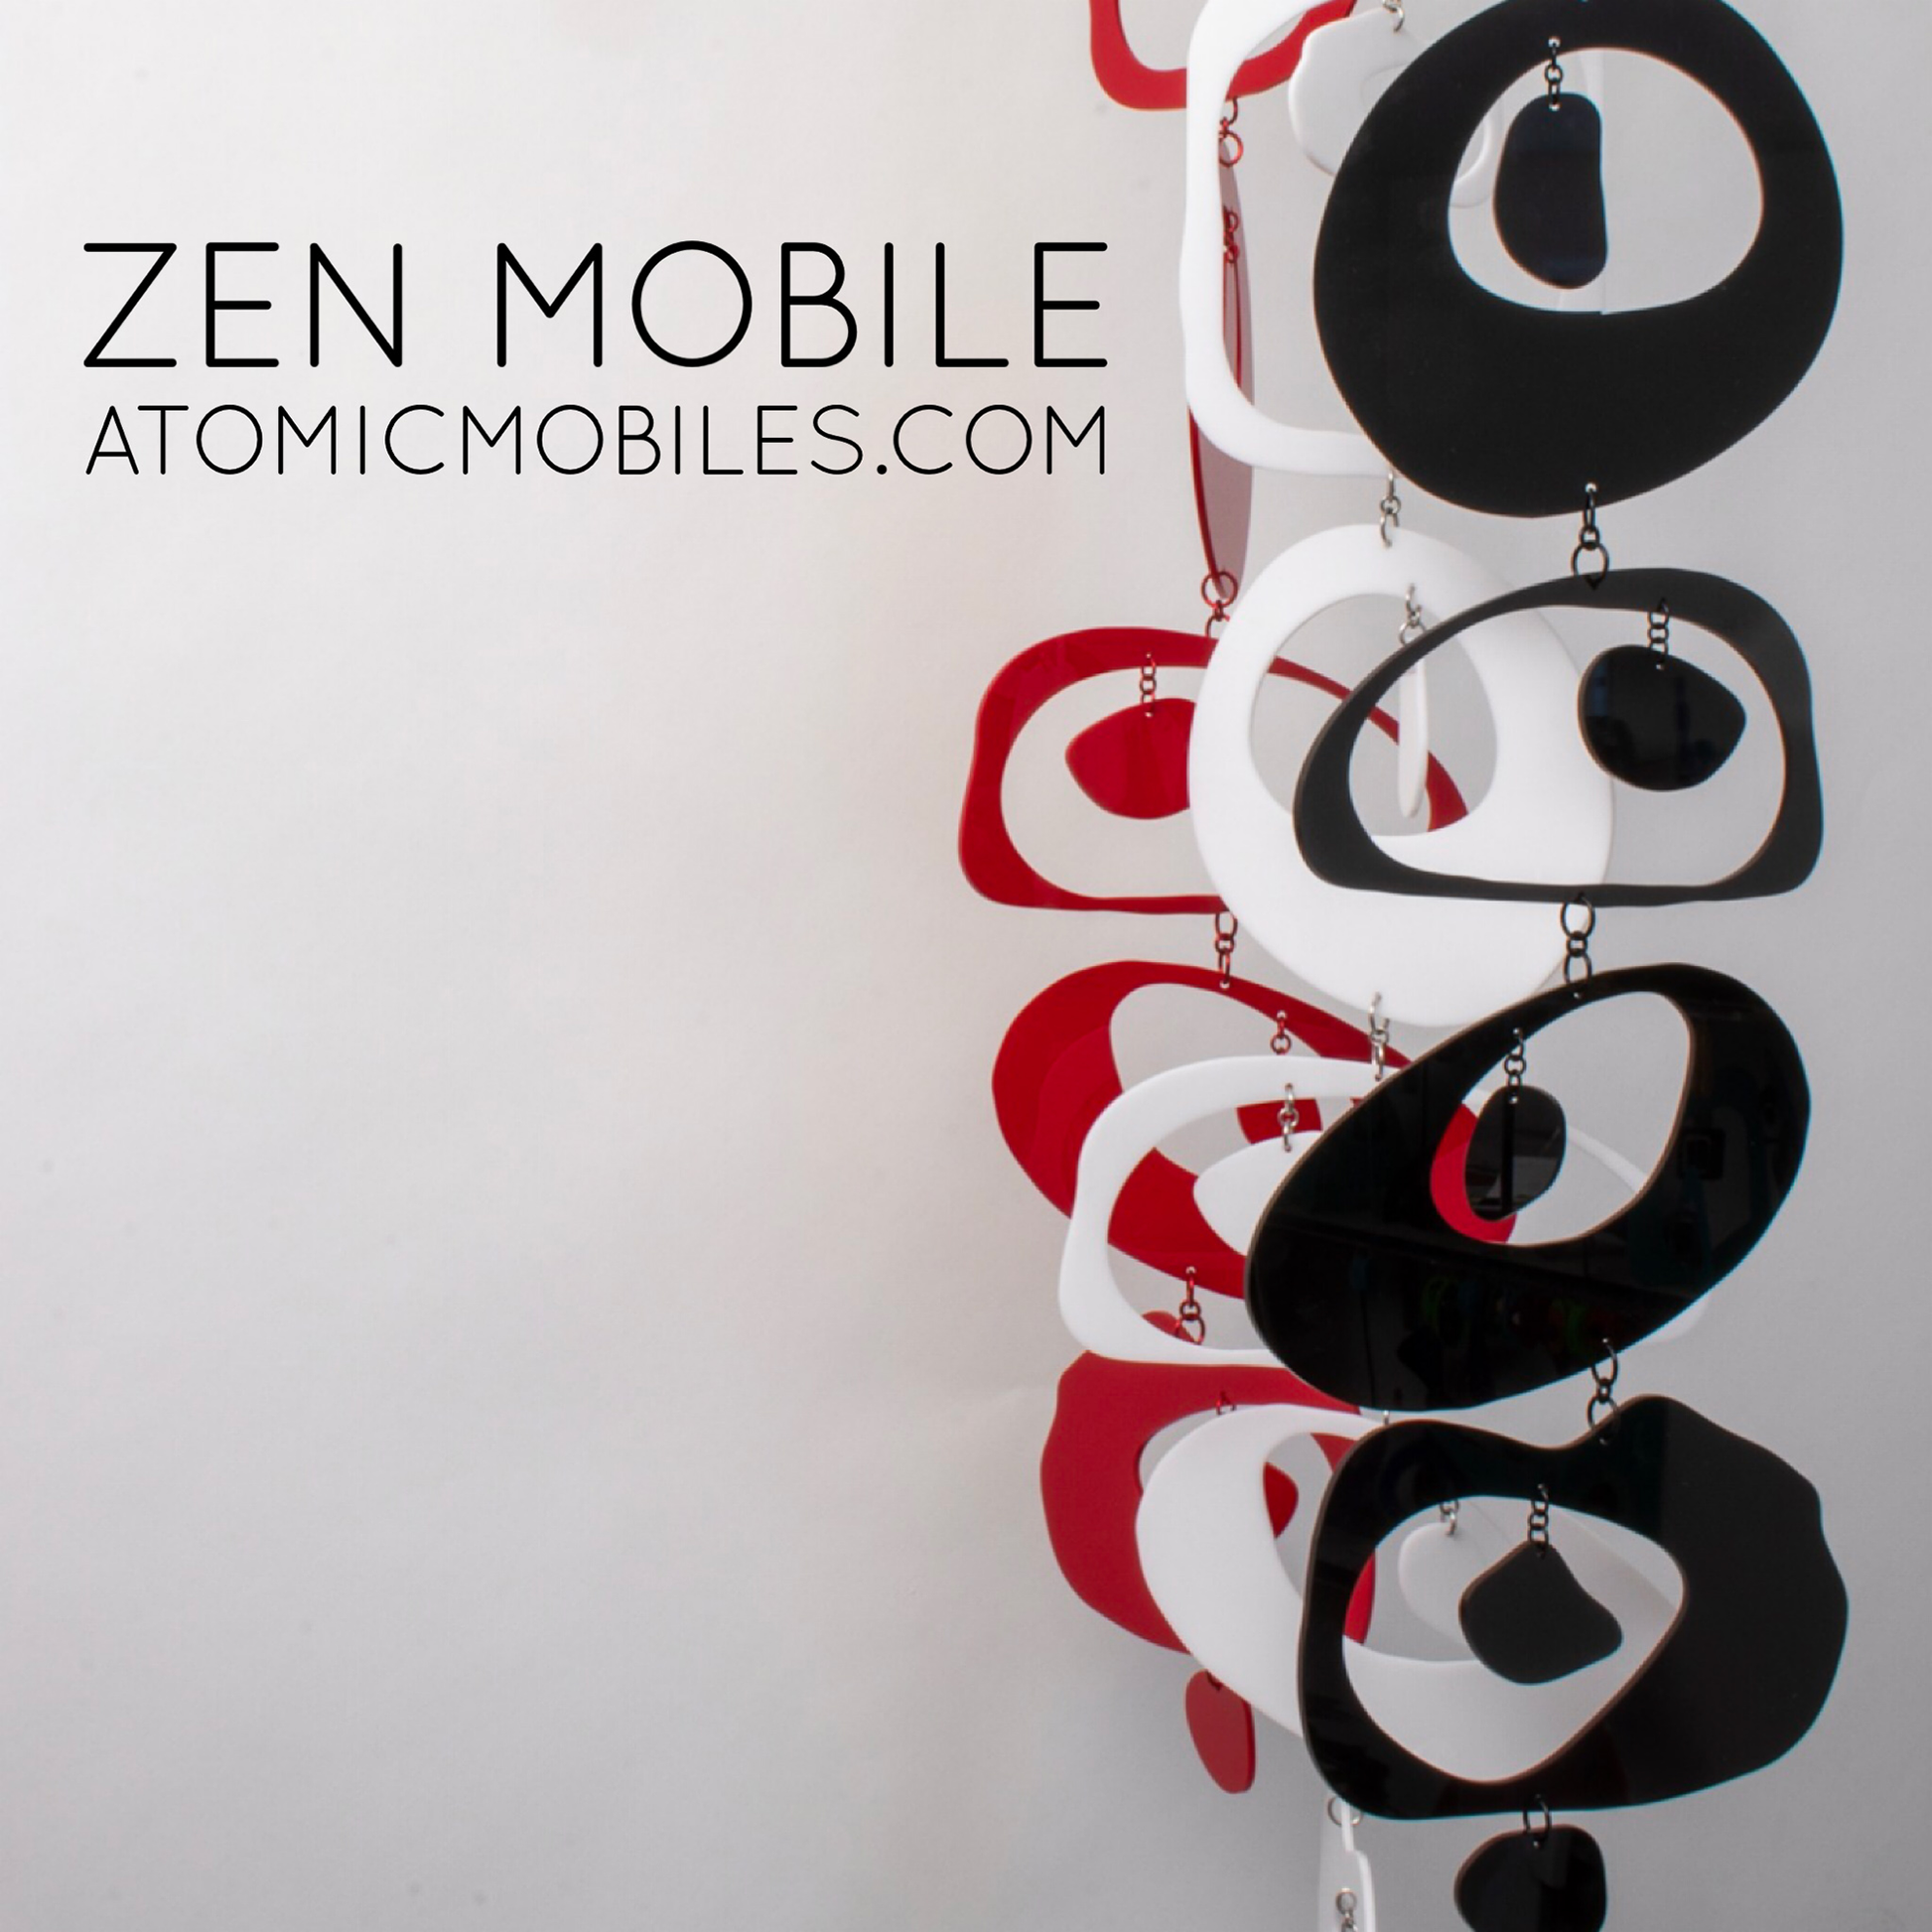 3 Zen Mobiles in Red, White, and Black by AtomicMobiles.com on white background - calm kinetic sculpture inspired by rock balancing